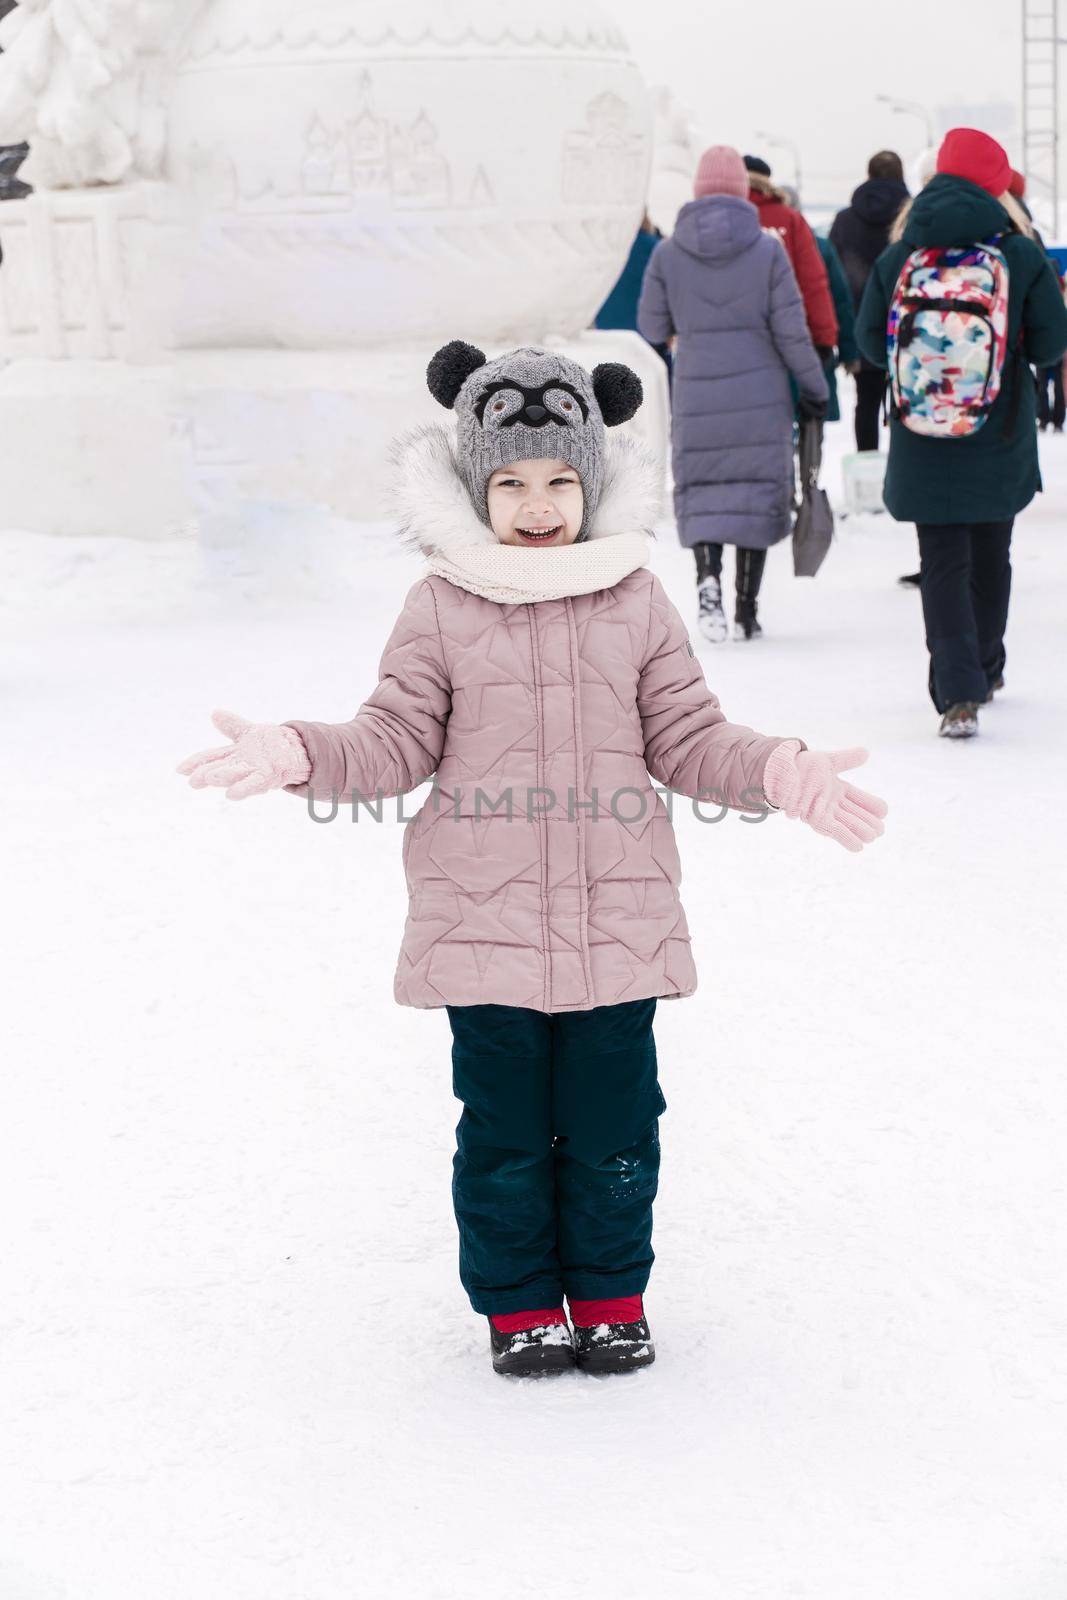 playful child girl happy in snow town on winter day by Lena_Ogurtsova